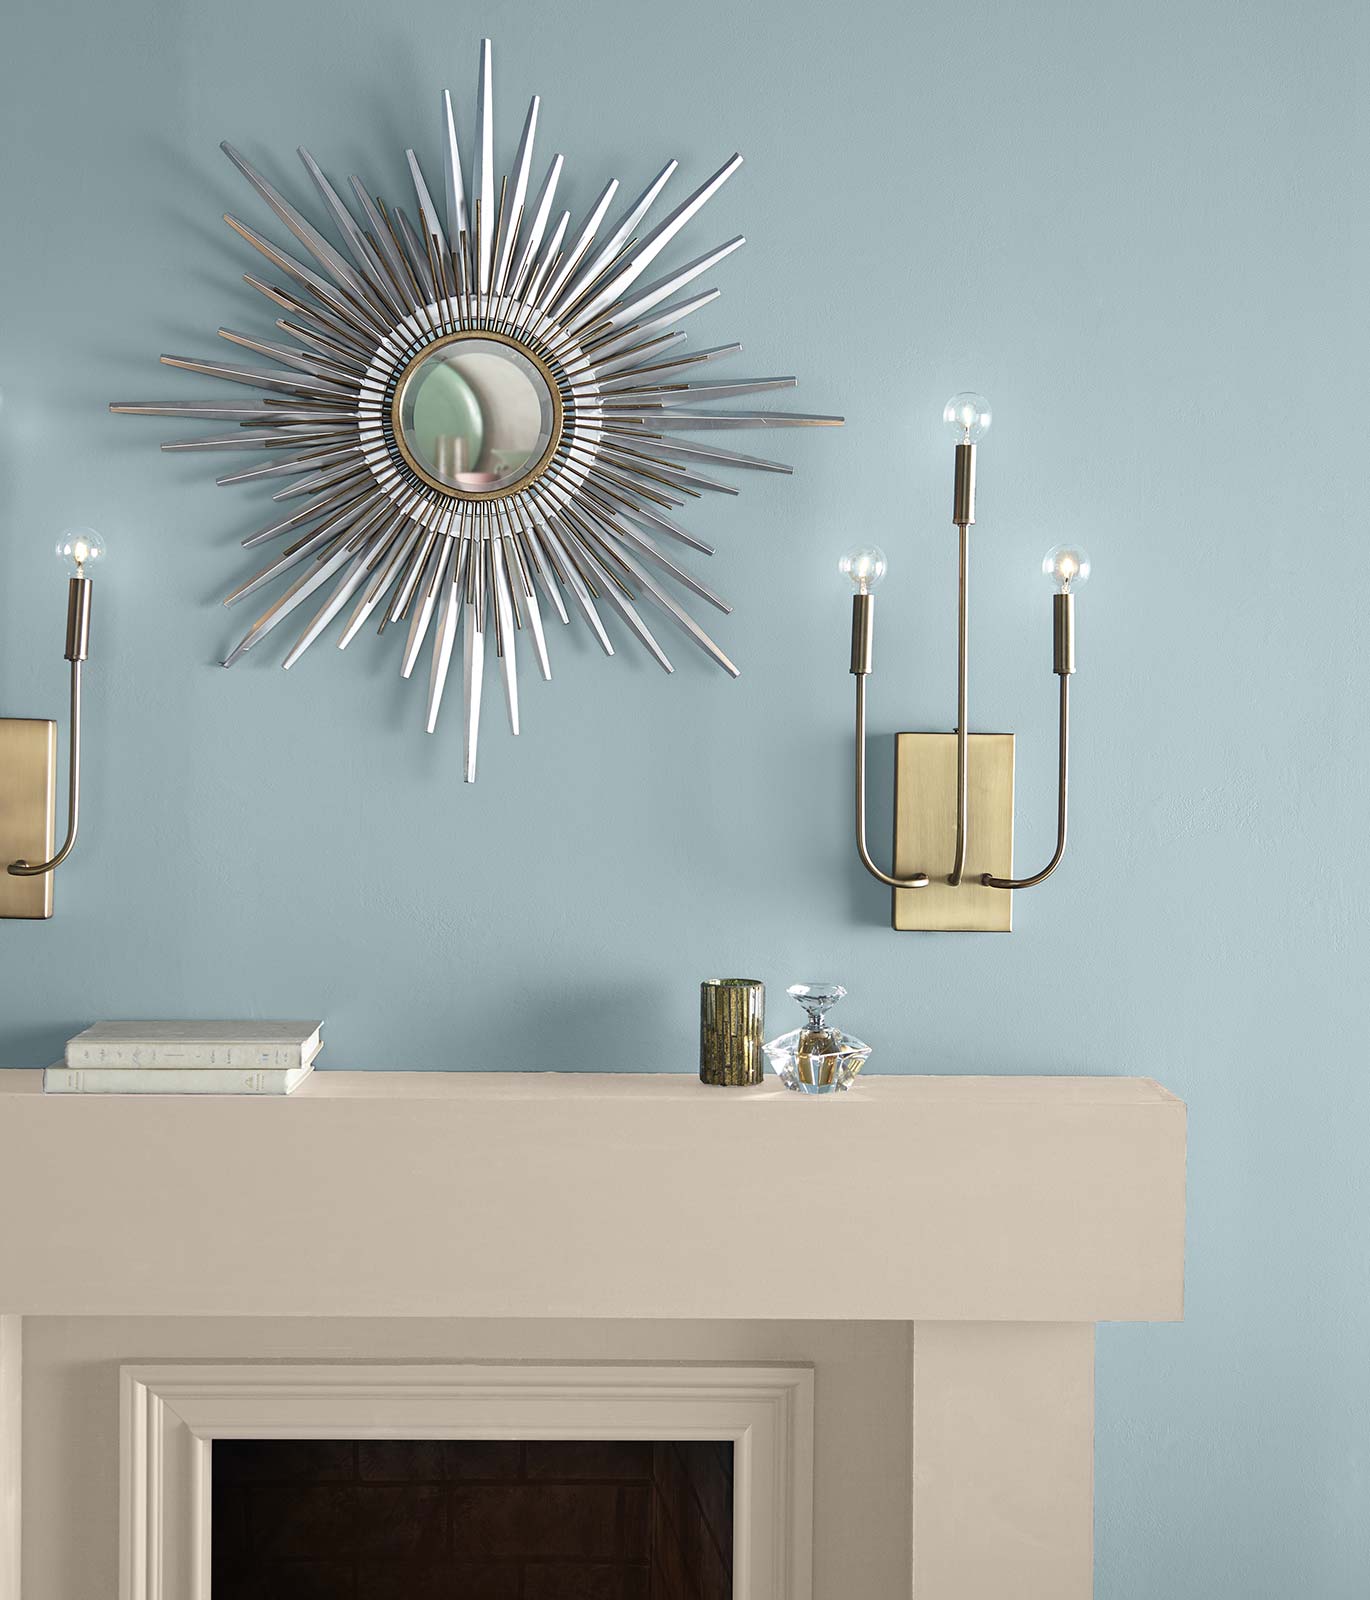 A tight crop of a cream colored fireplace against a denim blue painted wall inspiring a calm feeling